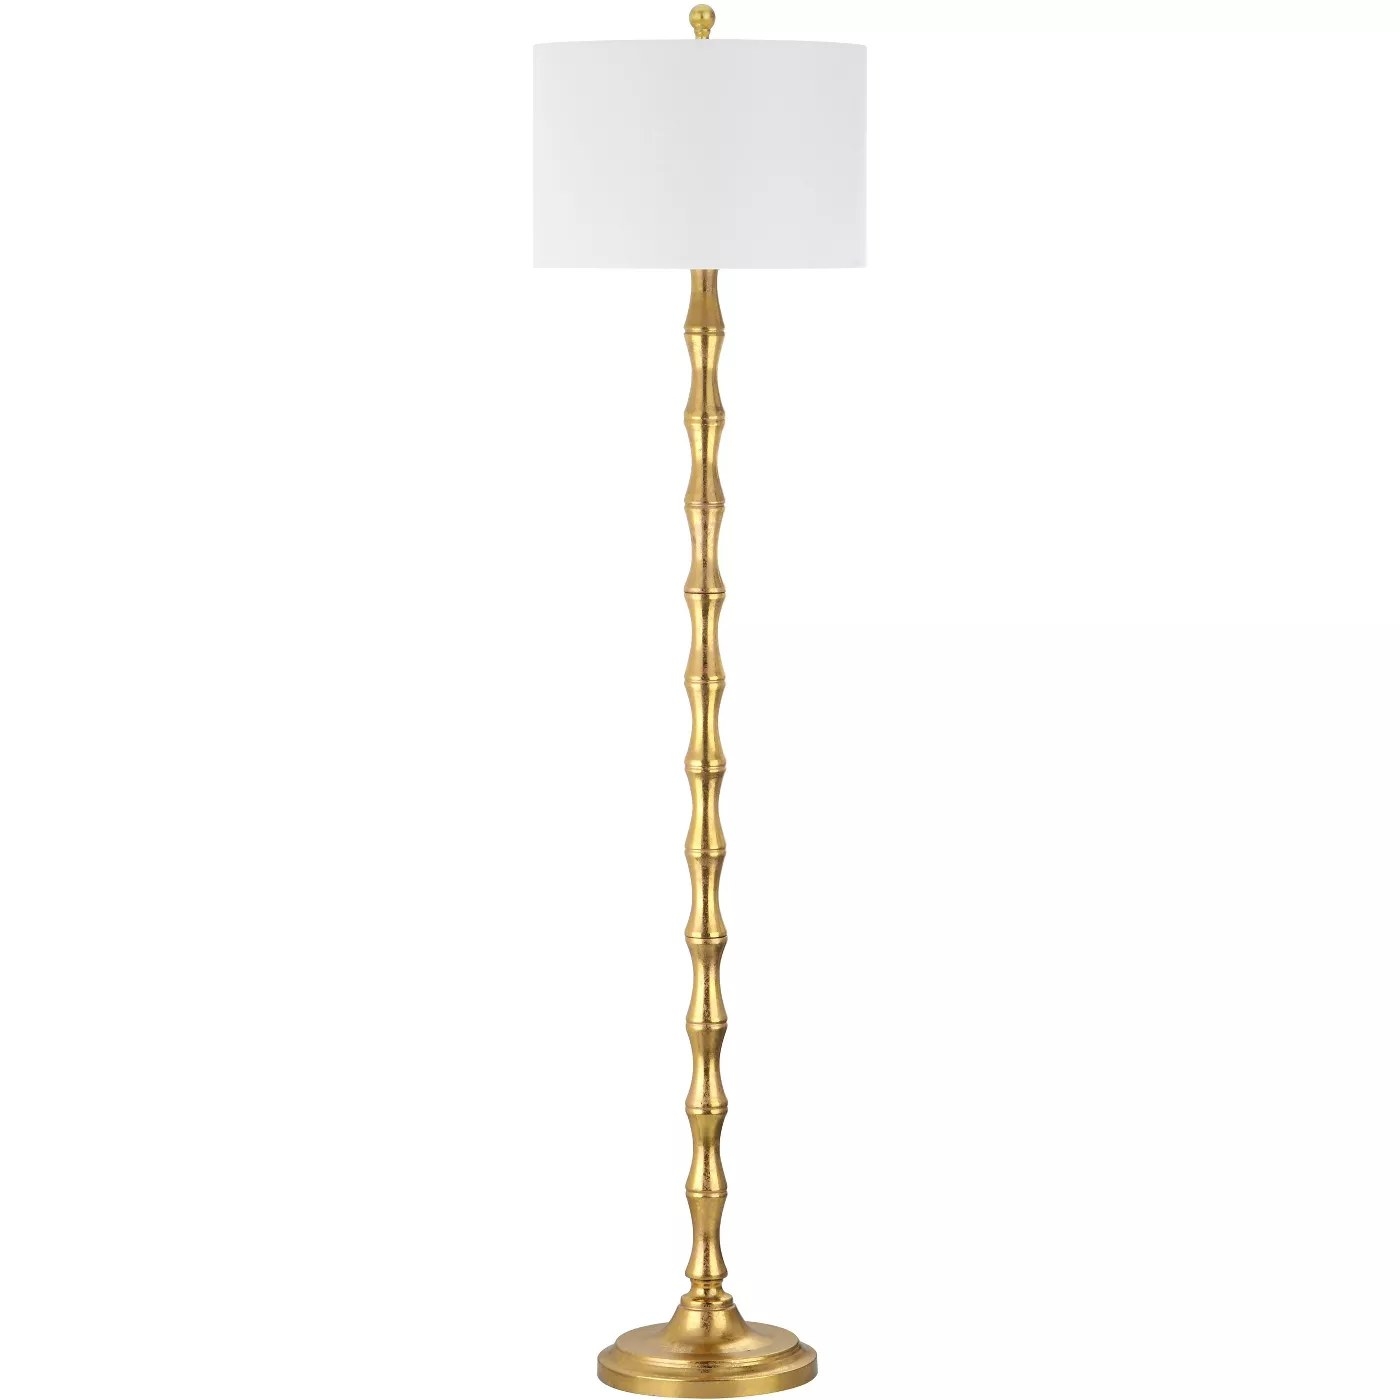 The white and gold floor lamp